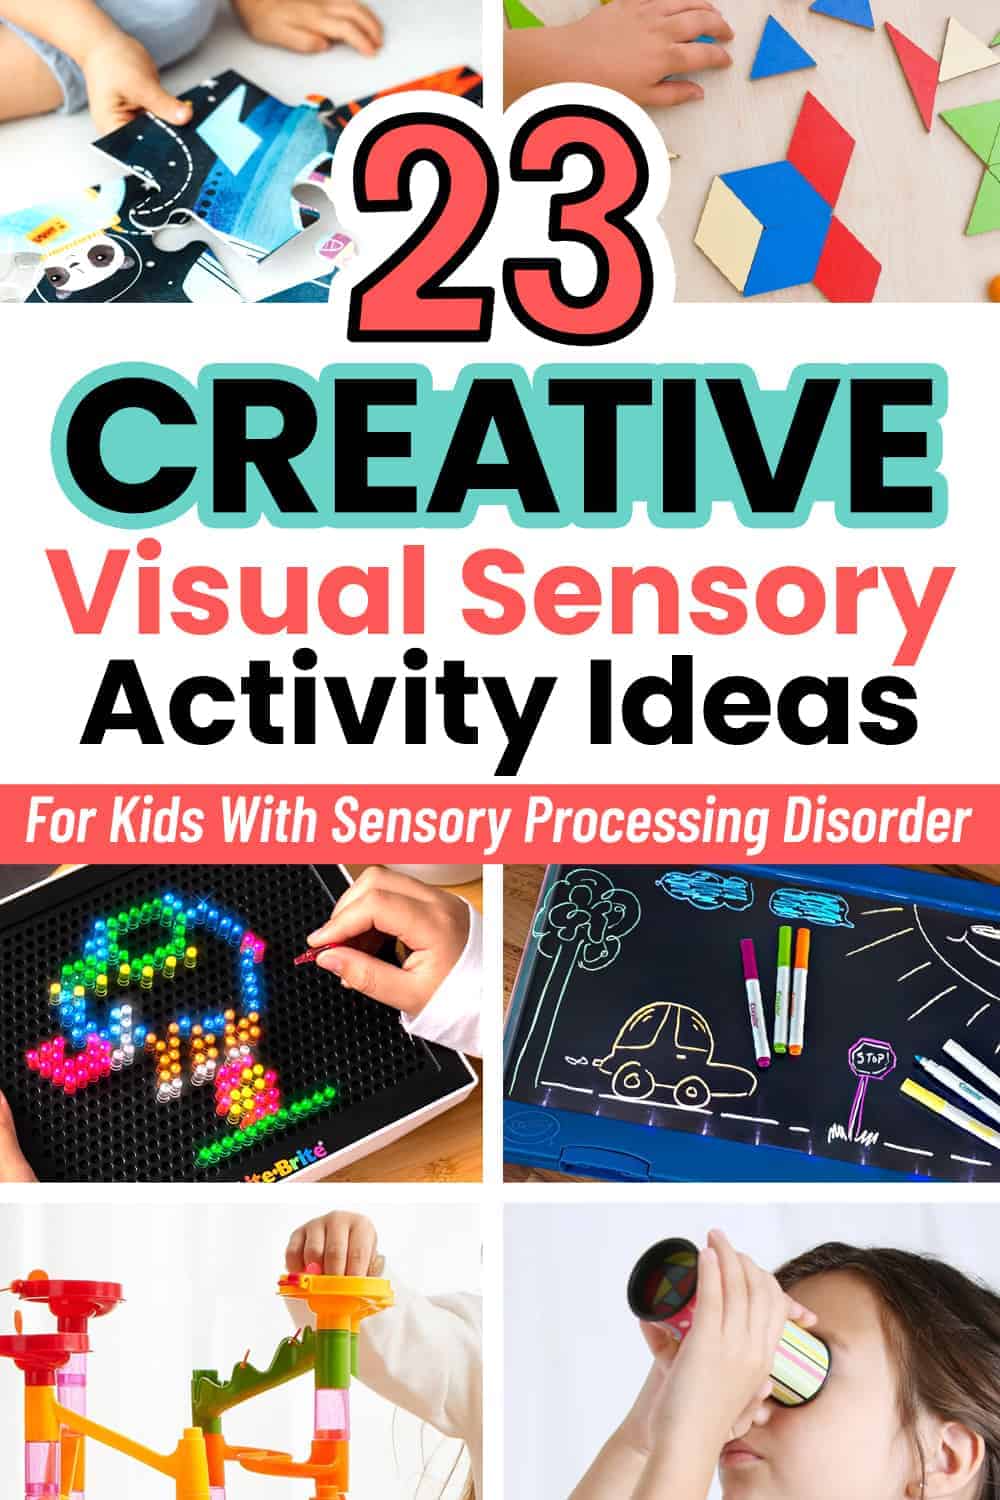 20 fun and creative visual sensory activities your child will love, plus why visual sensory processing is important, and how to help with visual sensory difficulties in kids.